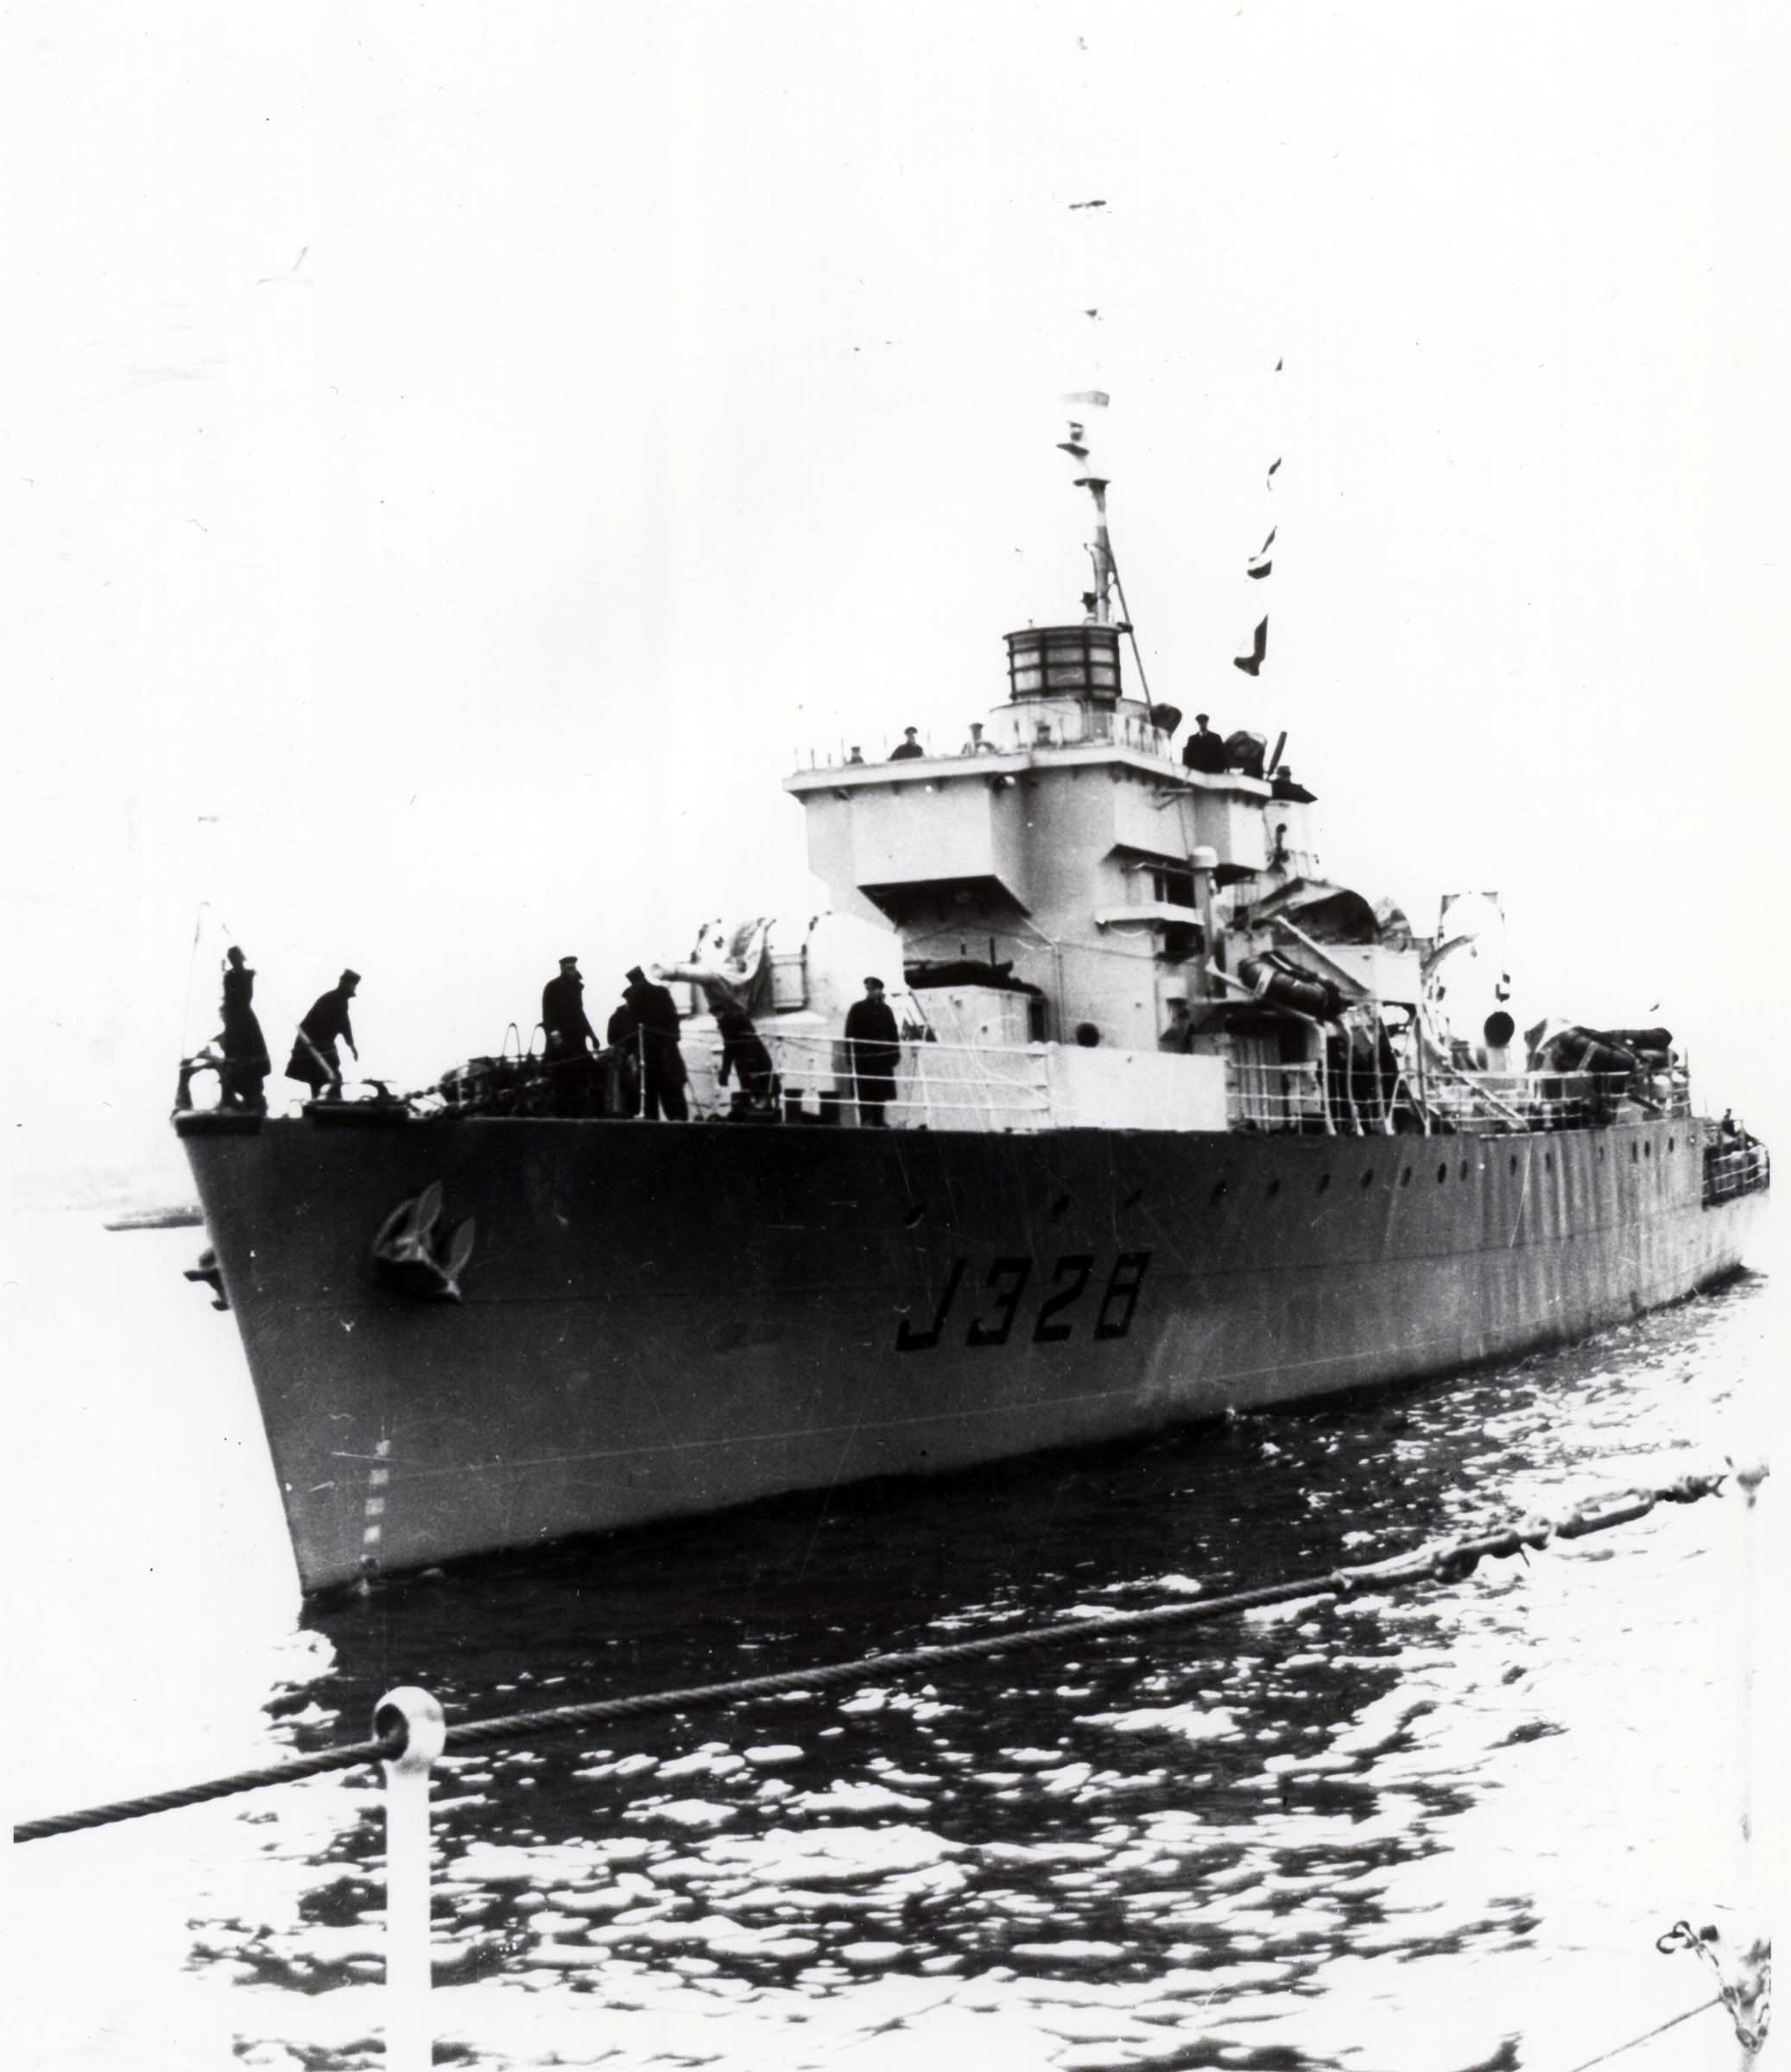 HMCS MIDDLESEX